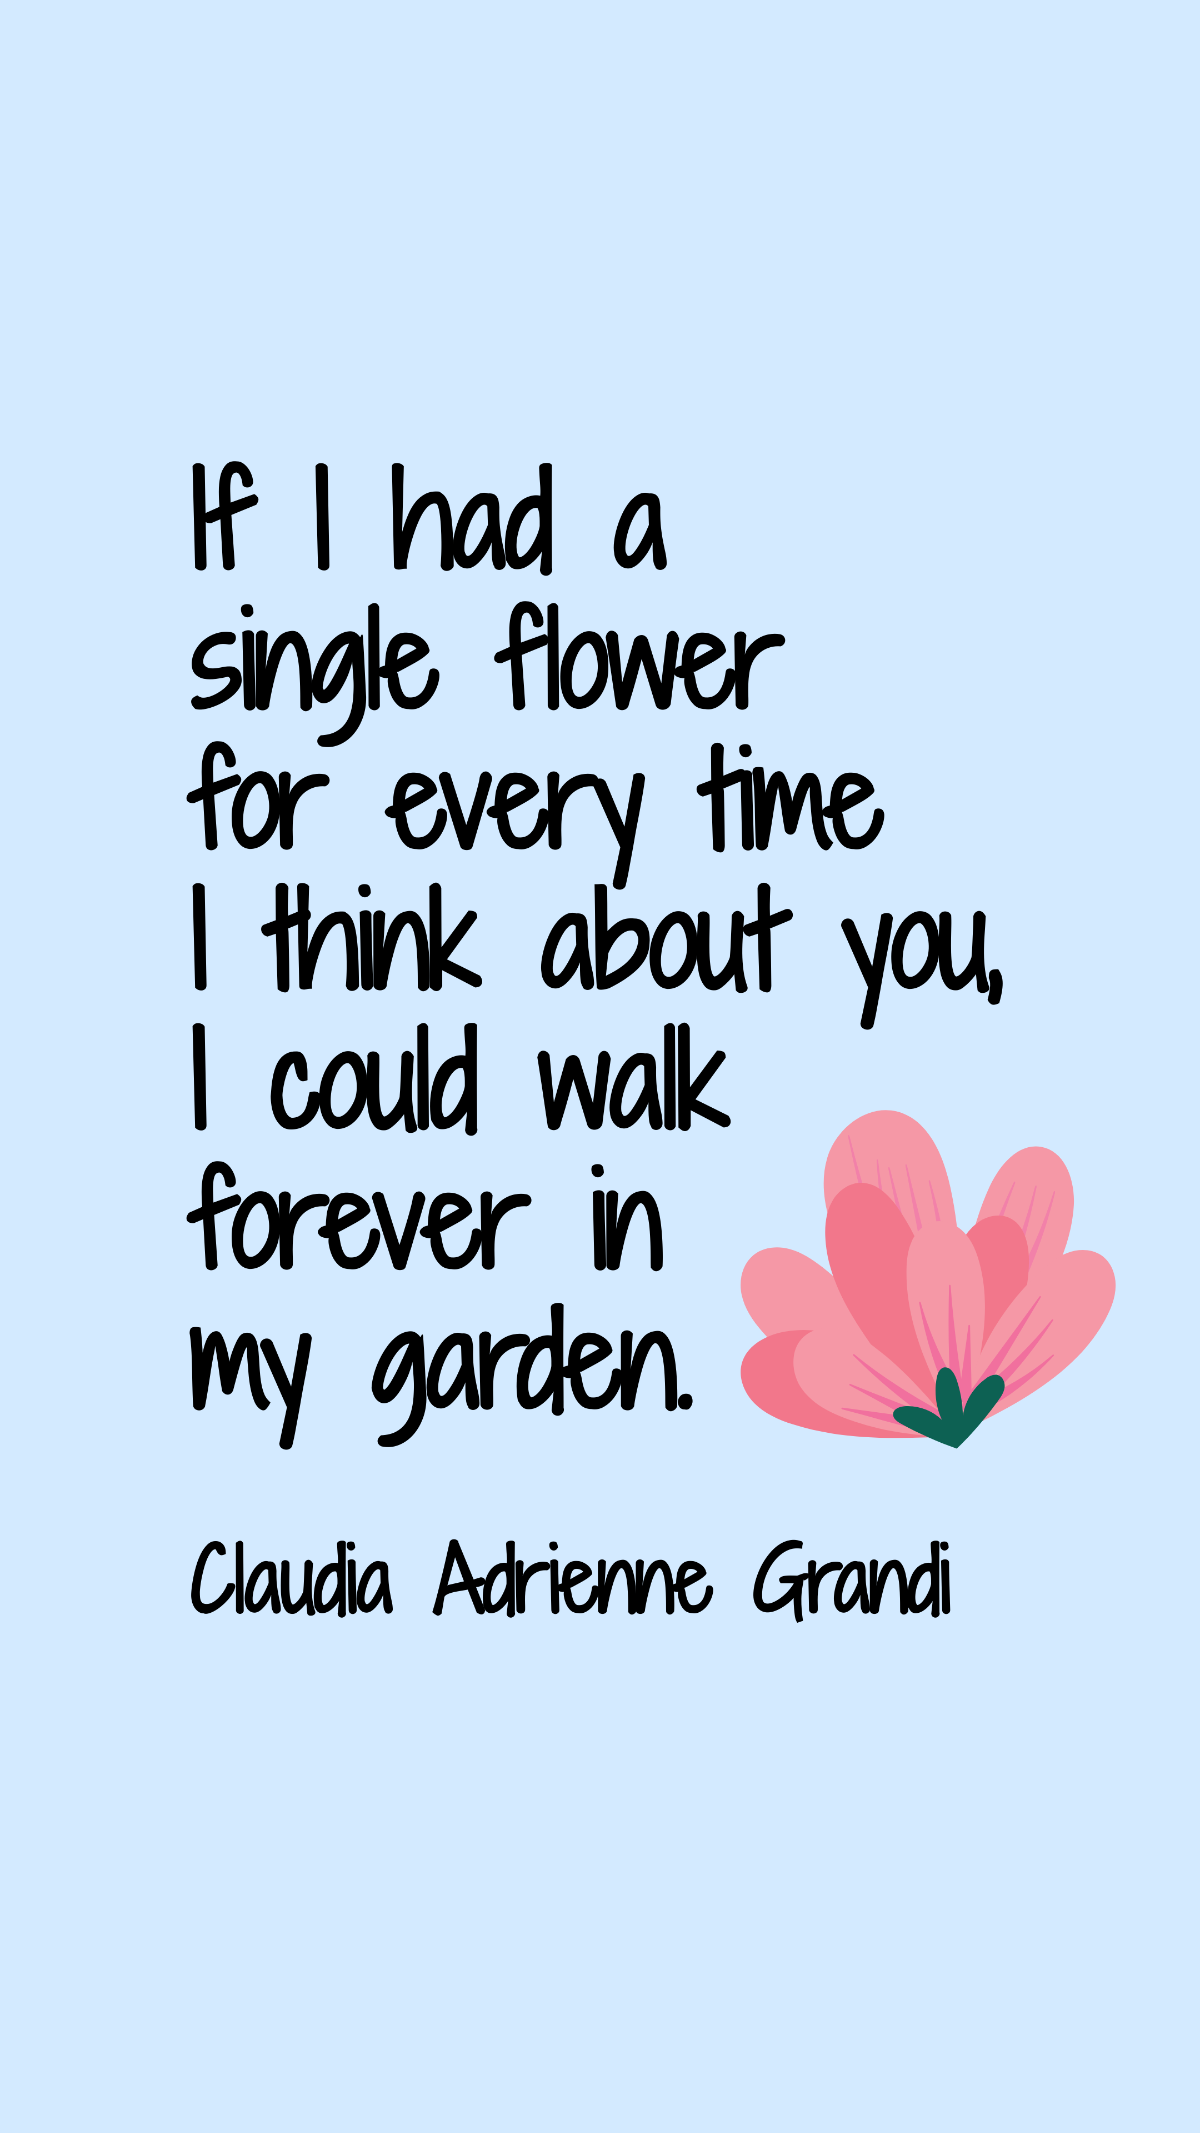 Claudia Adrienne Grandi - If I had a single flower for every time I think about you, I could walk forever in my garden. Template